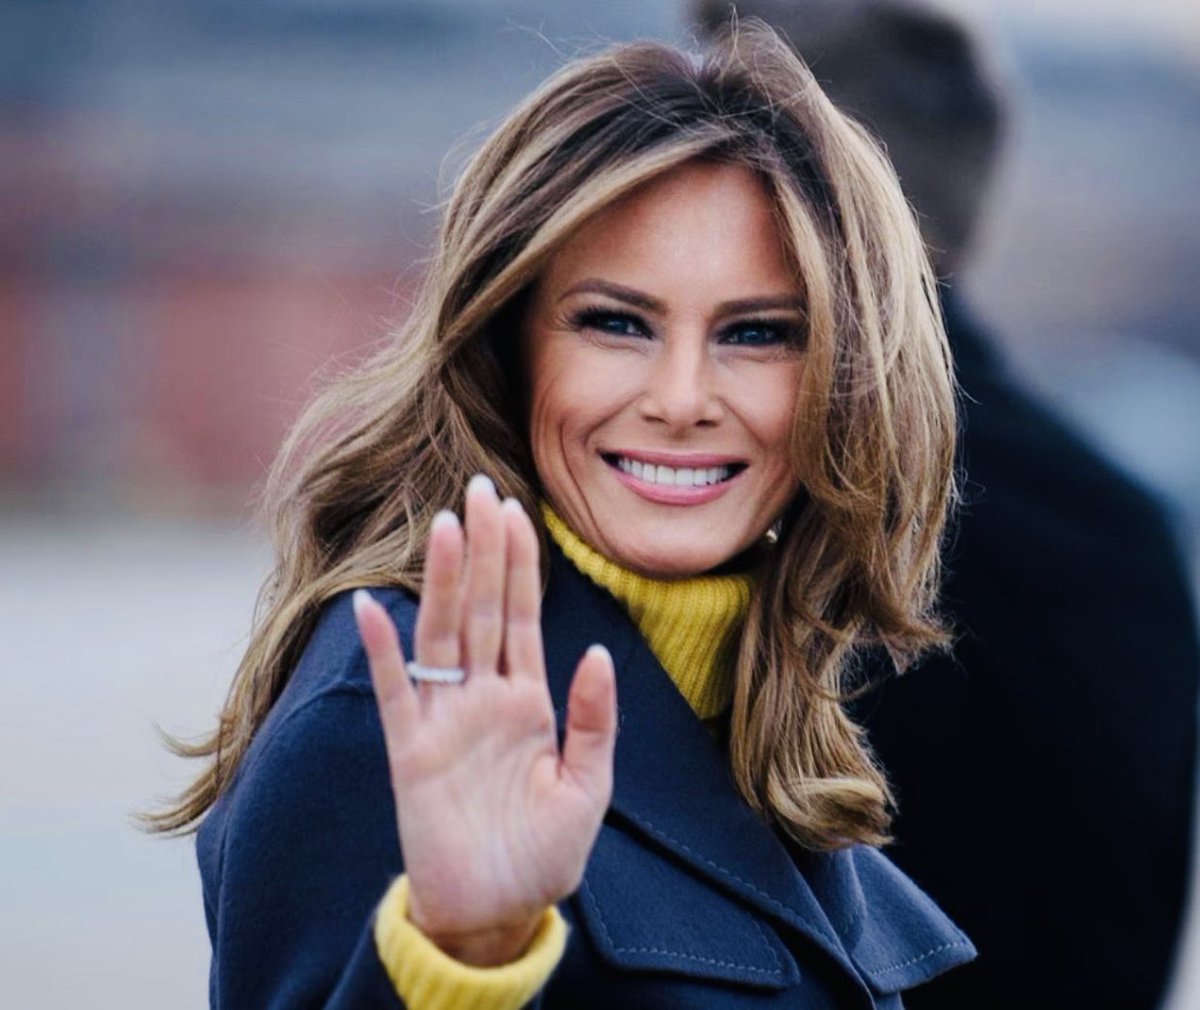 Isn’t she lovely? Can’t wait till she’s back ……as our First Lady.